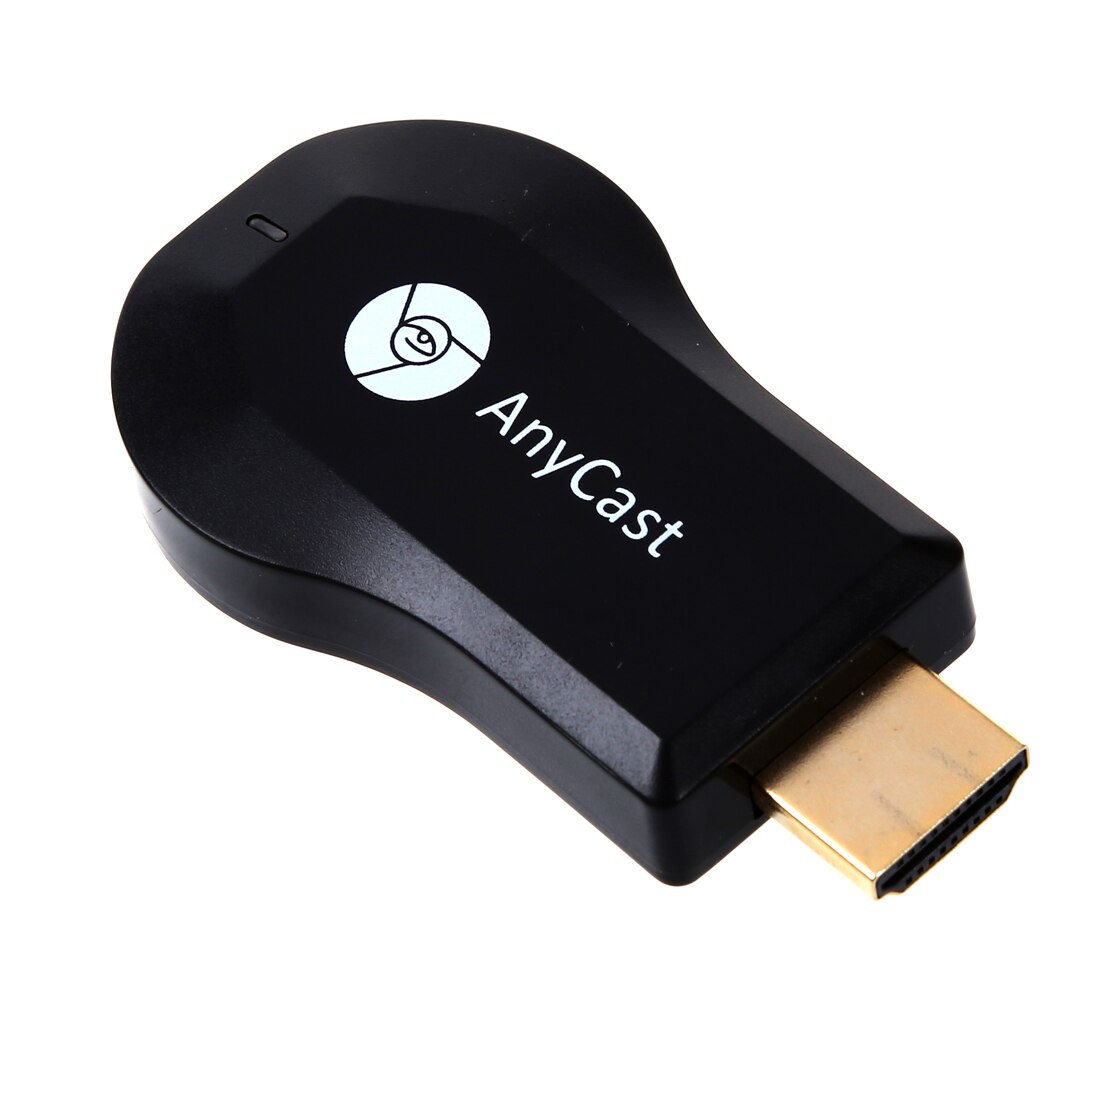 Mool Anycast M2 Plus Mini Wifi Display Dongle Ontvanger 1080P Airmirror Dlna Airplay Miracast Sharing Hdmi Poort Voor hdtv